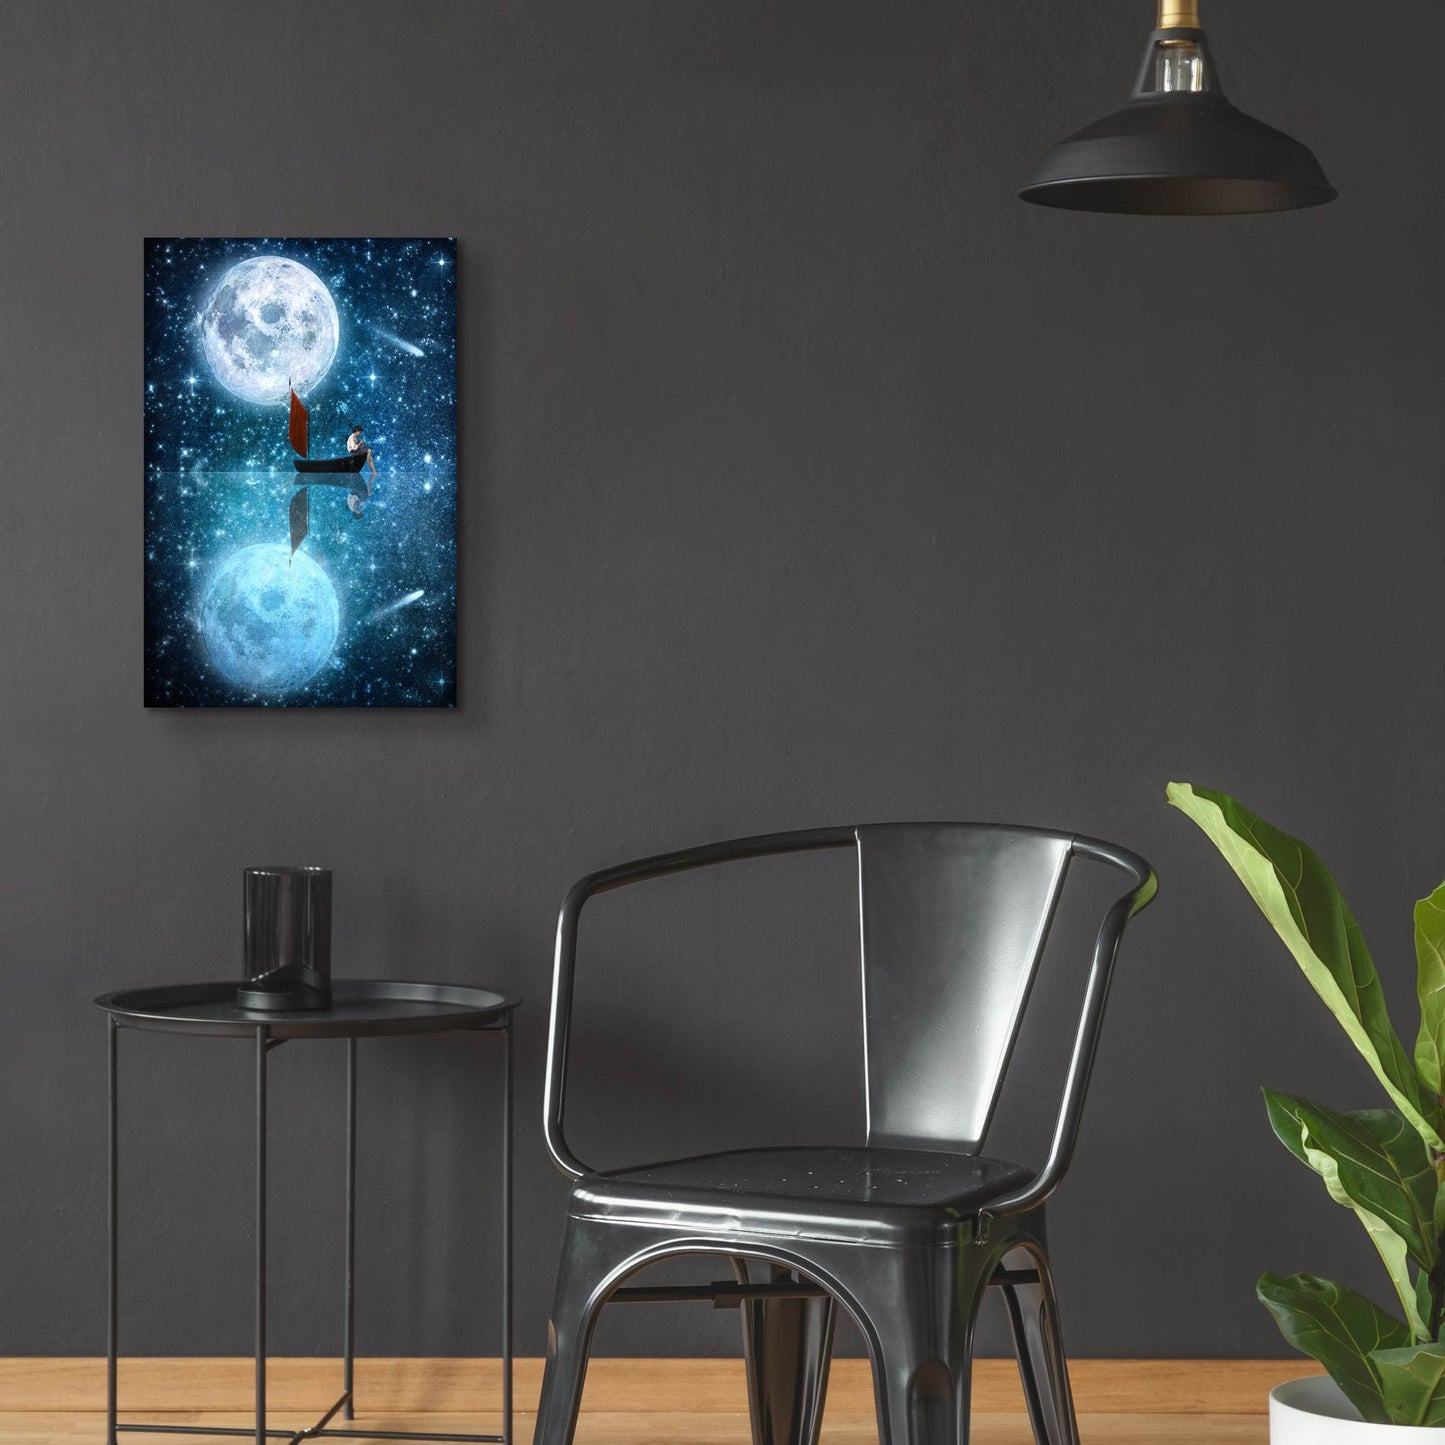 Epic Art 'The Moon And Me' by Diogo Verissimo, Acrylic Glass Wall Art,16x24